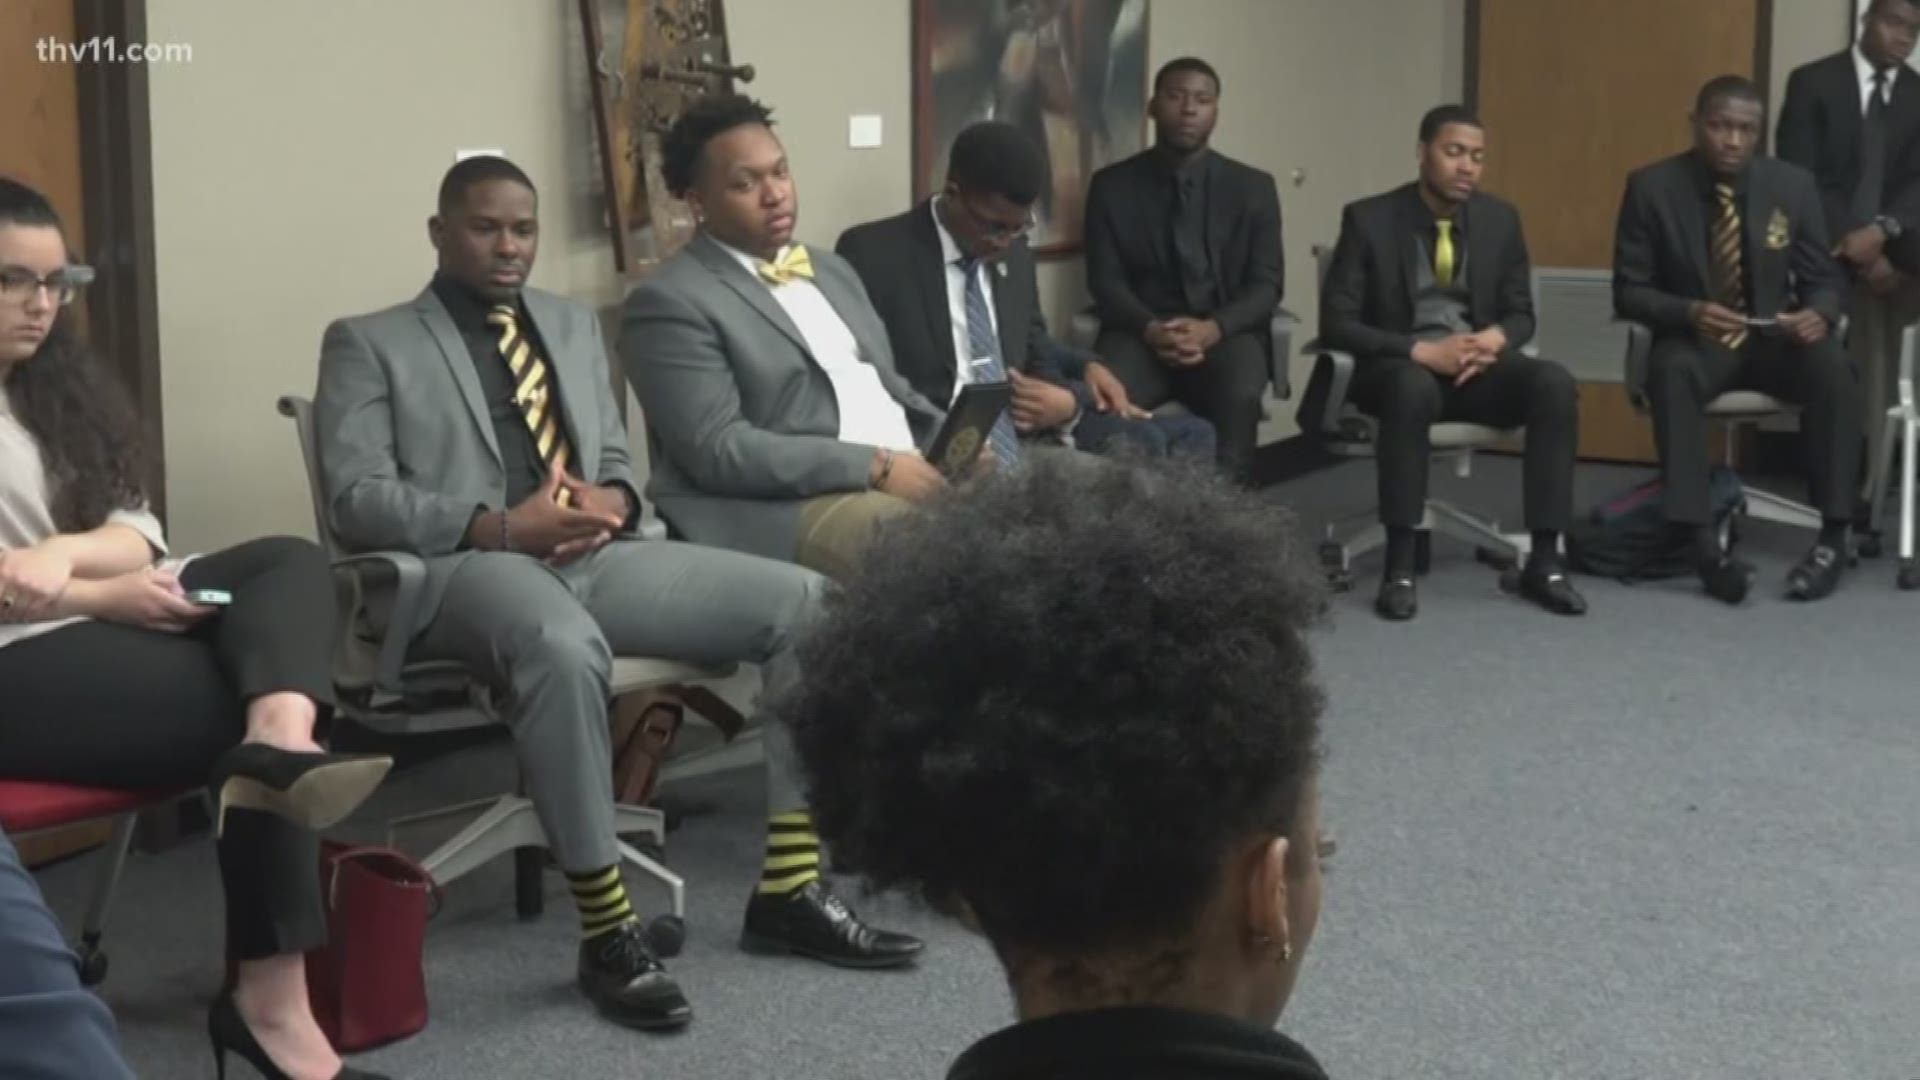 The students held an open discussion regarding the incident where white students sang a racial slur in a video.